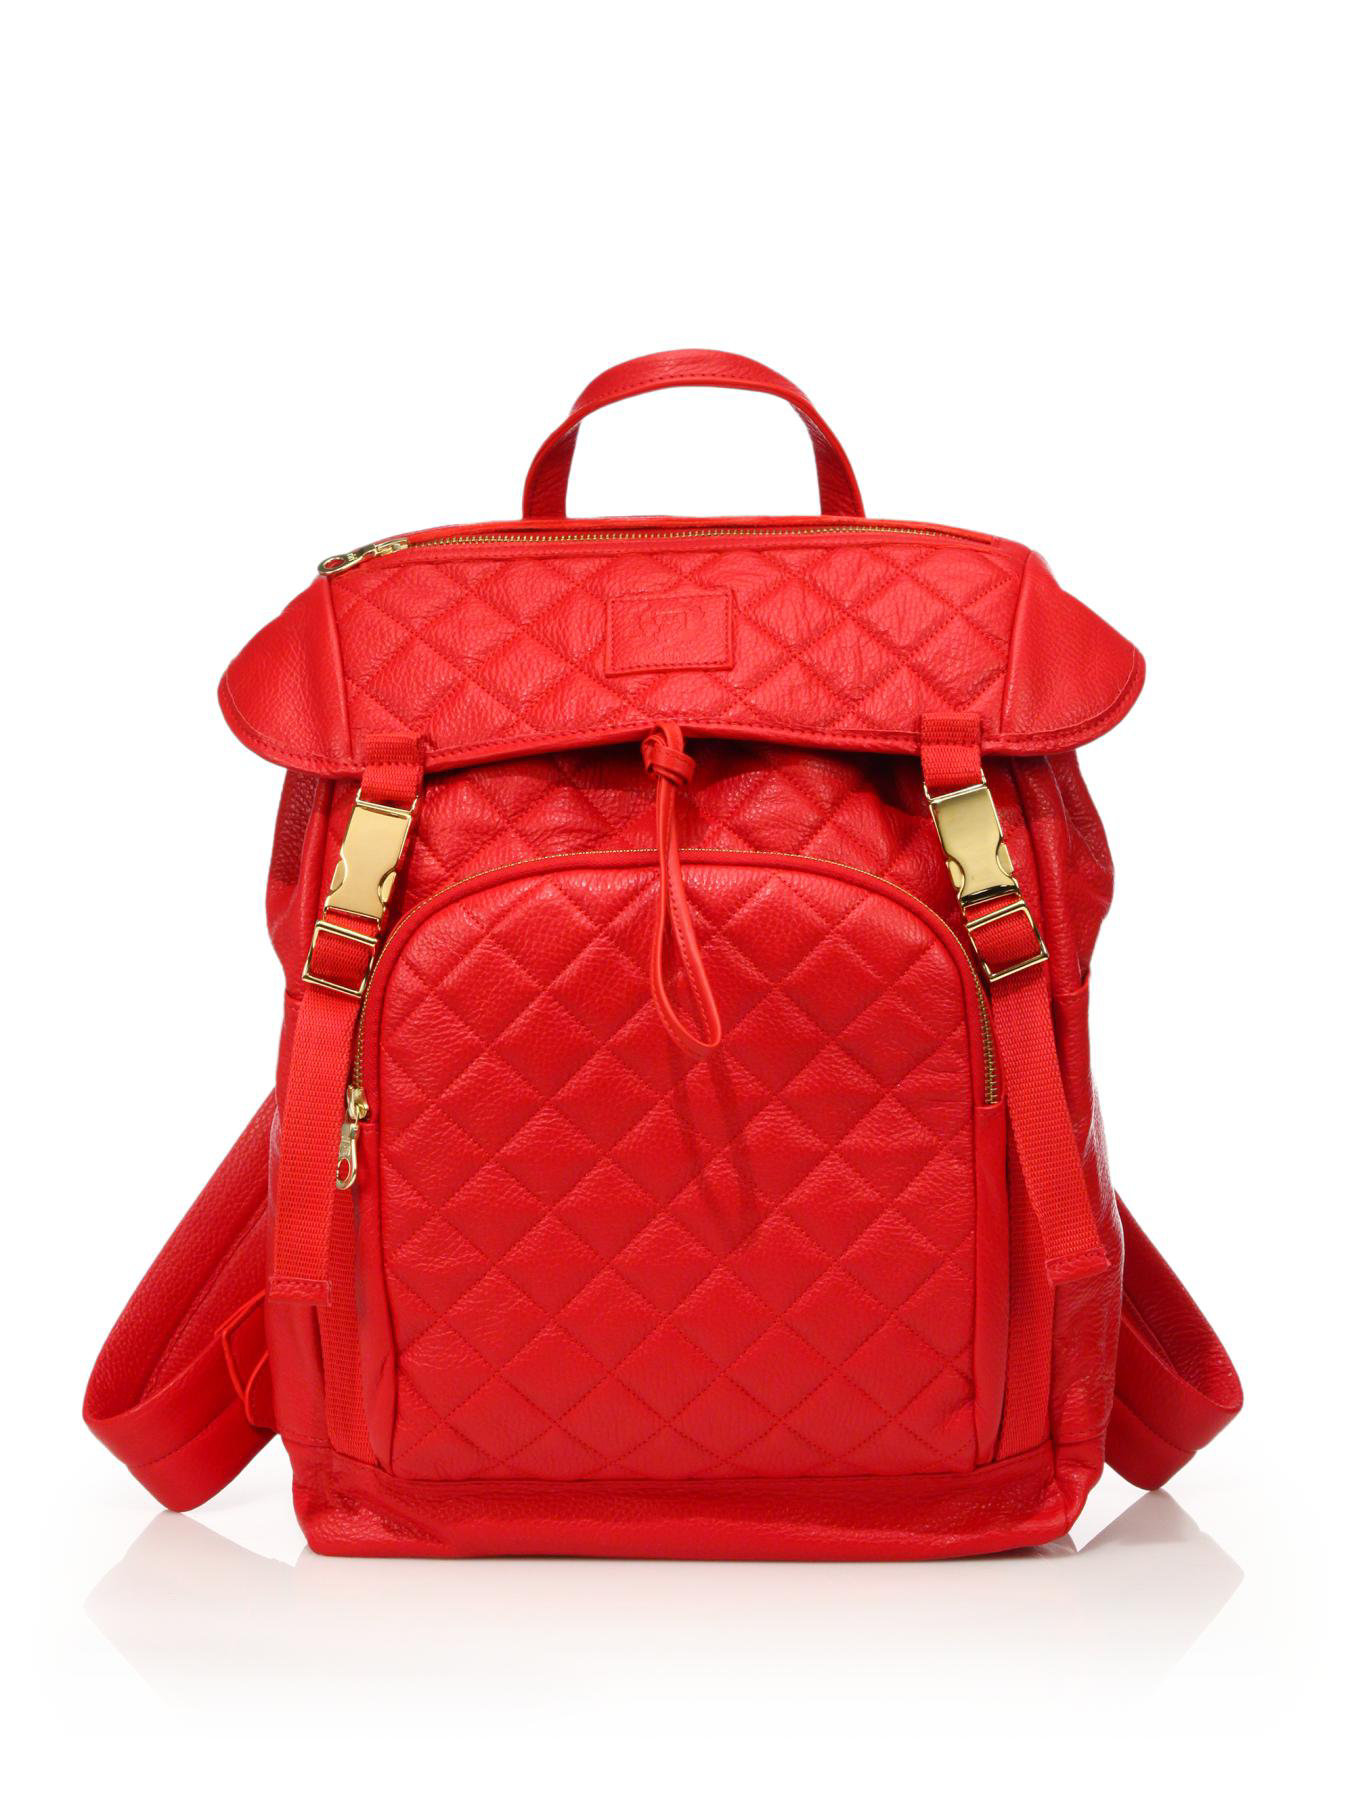 Del toro Quilted Leather Backpack in Red for Men | Lyst